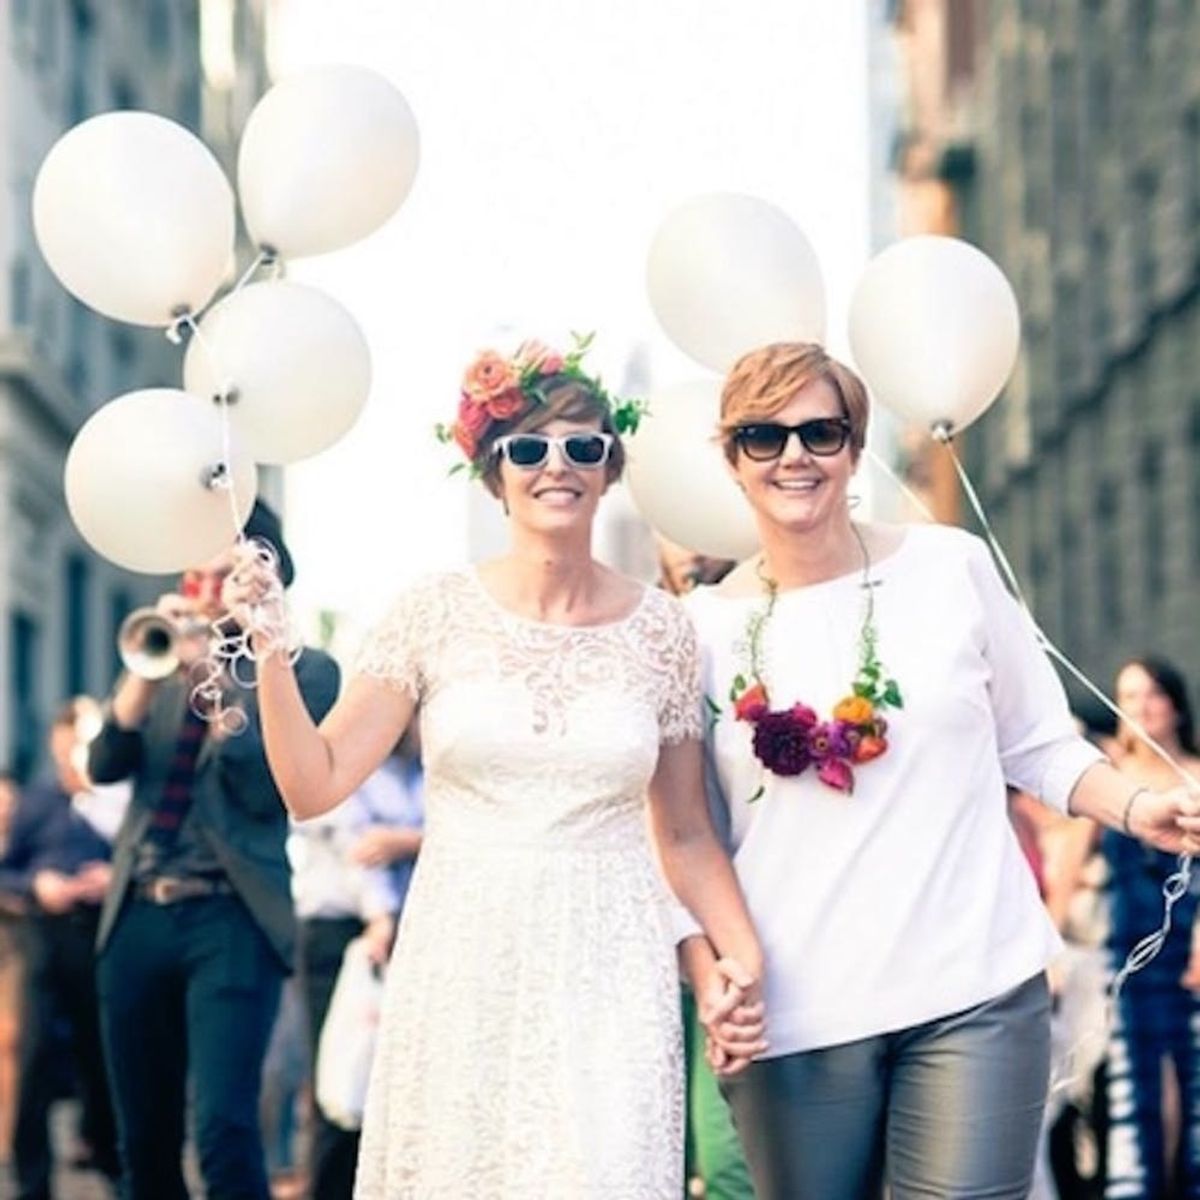 These Brooklyn Brides’ Epic Wedding Day Parade Is a Must Watch